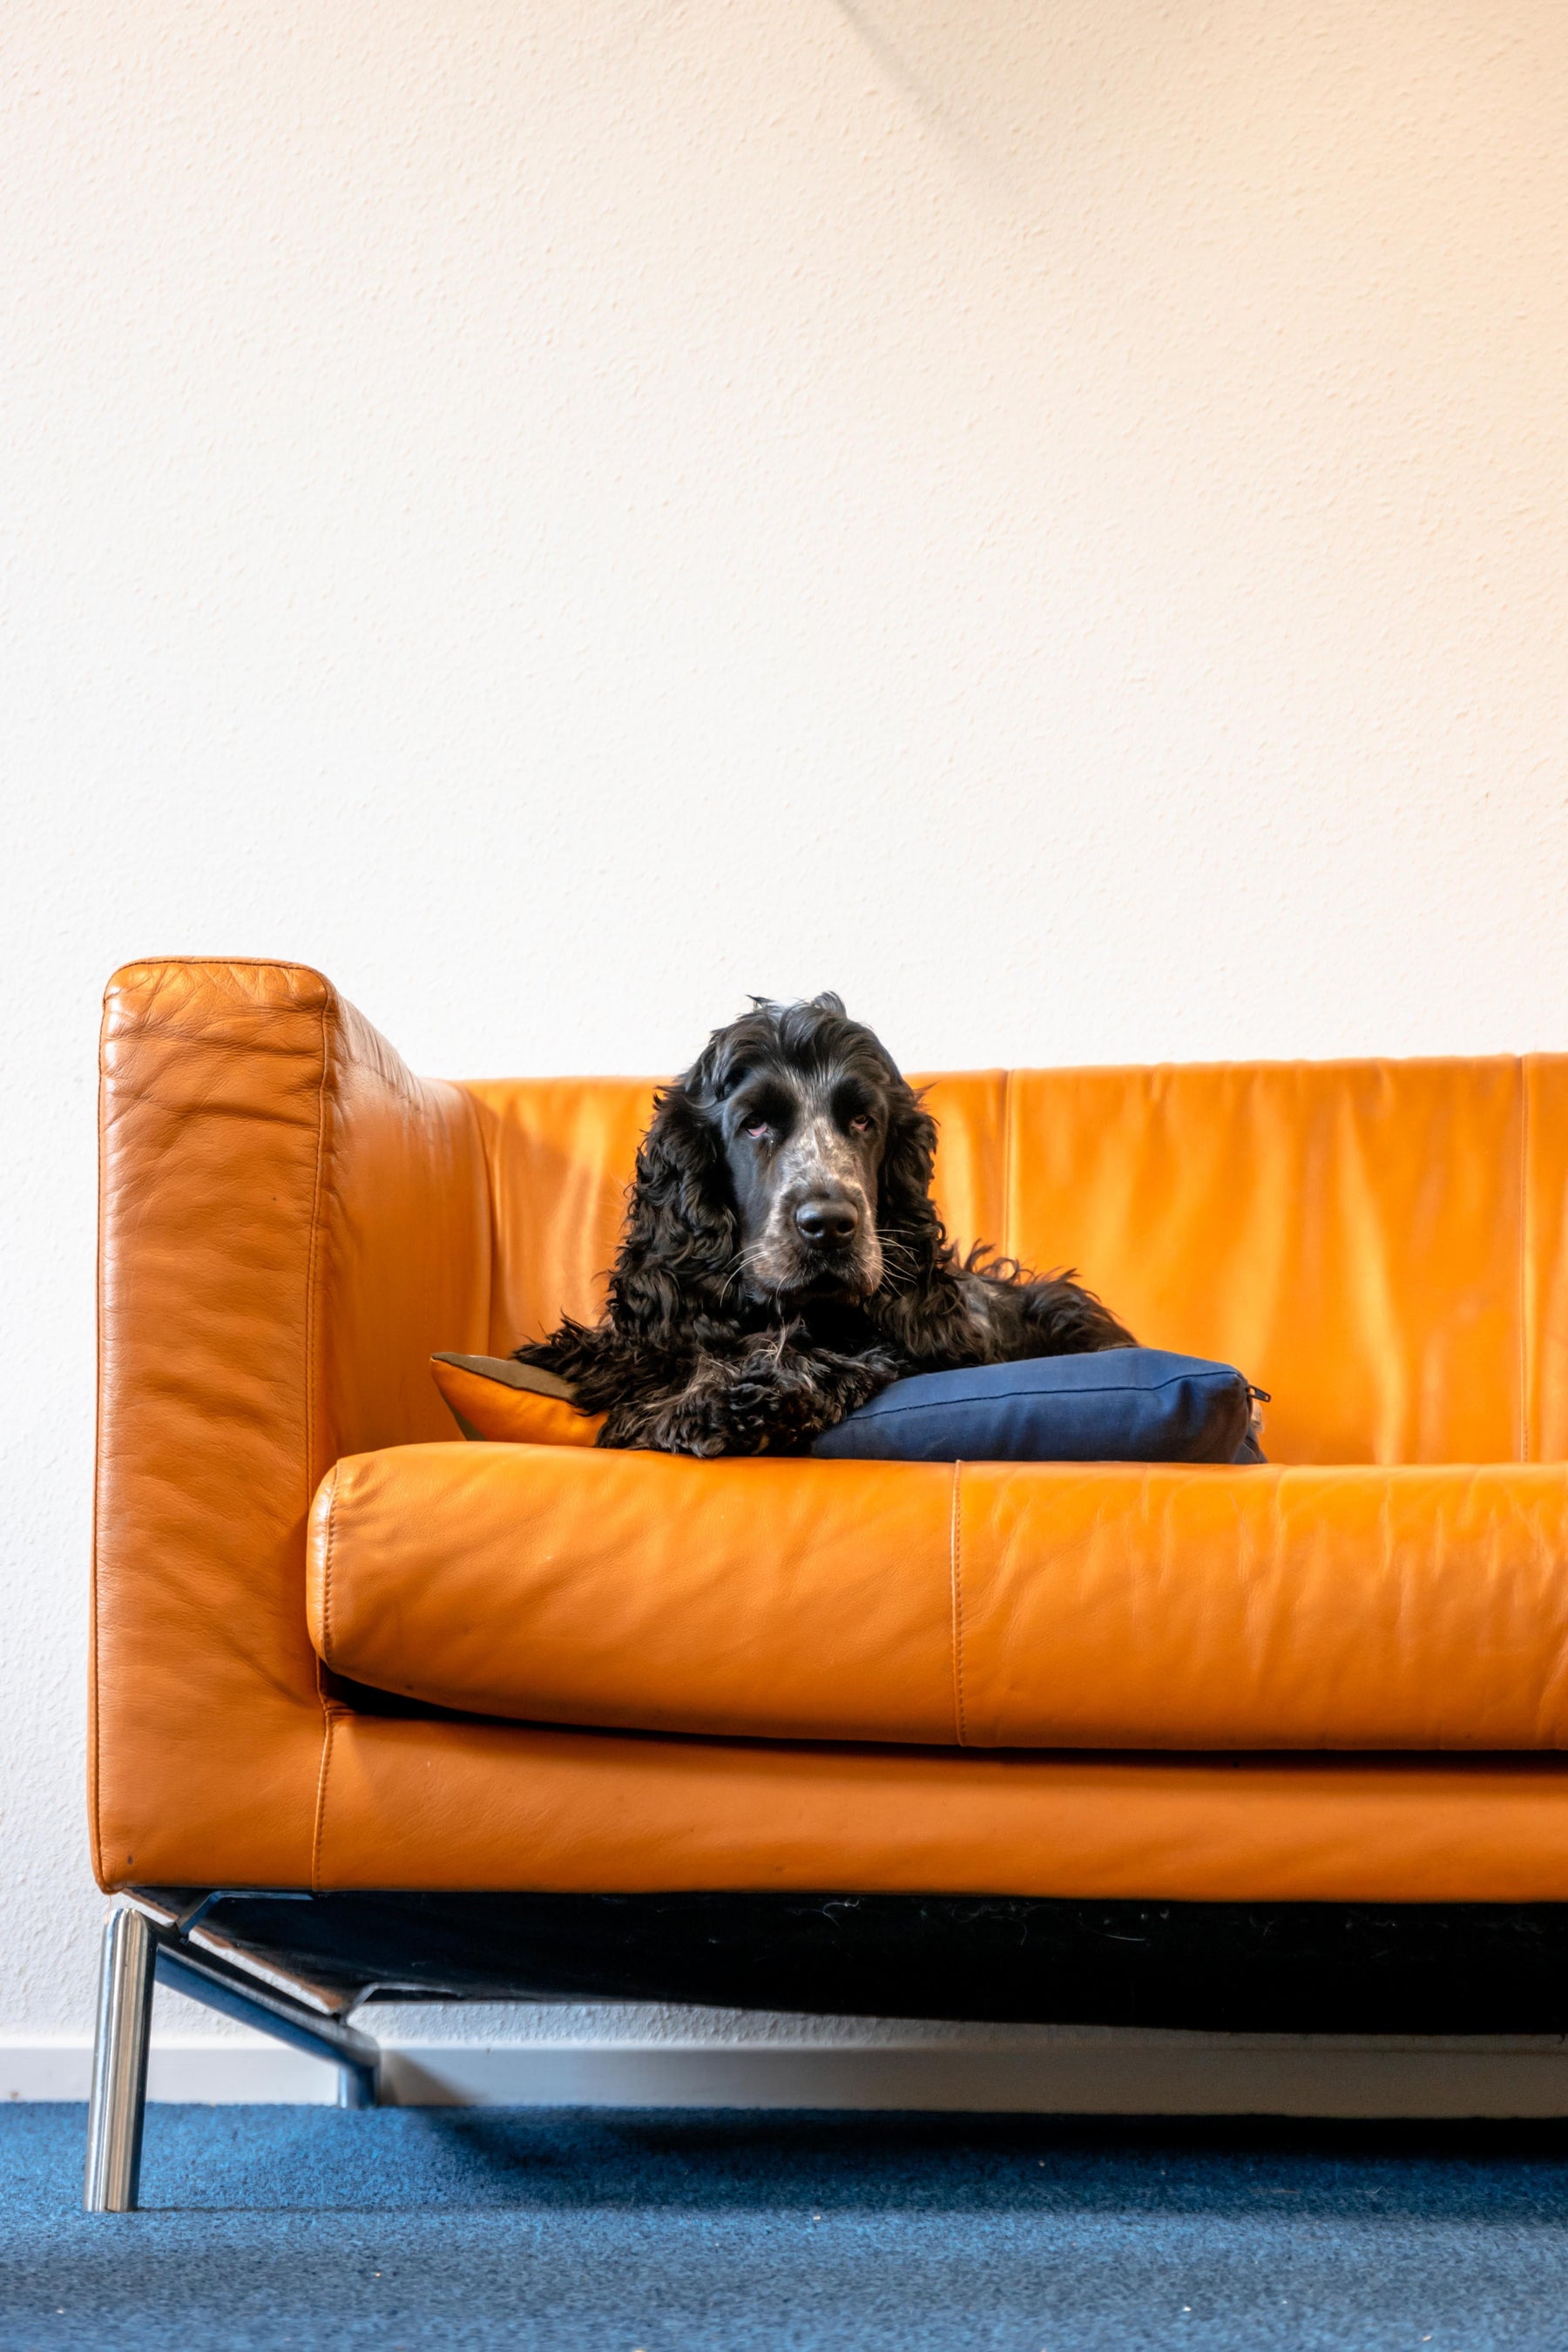 How to choose furniture that’s pet friendly? | lowrysfurniturestore